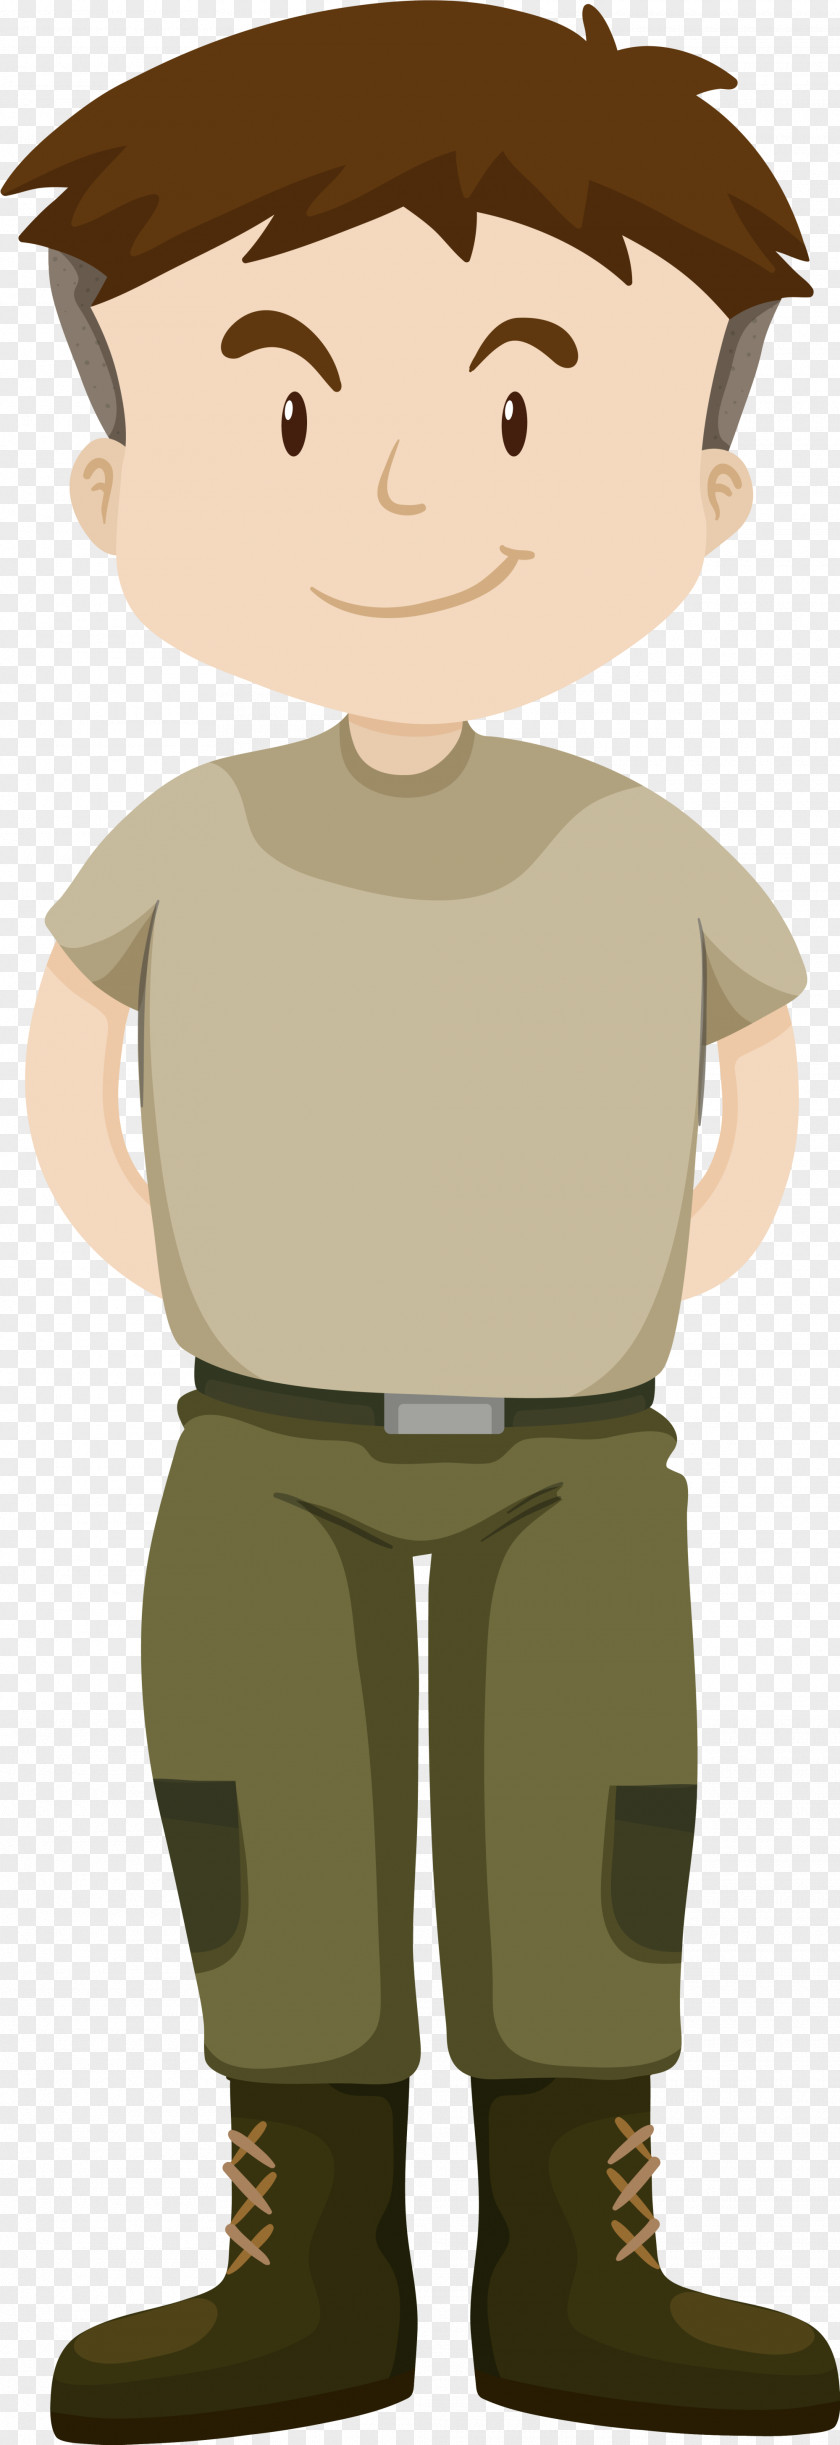 Green Cartoon Soldiers Soldier Royalty-free PNG